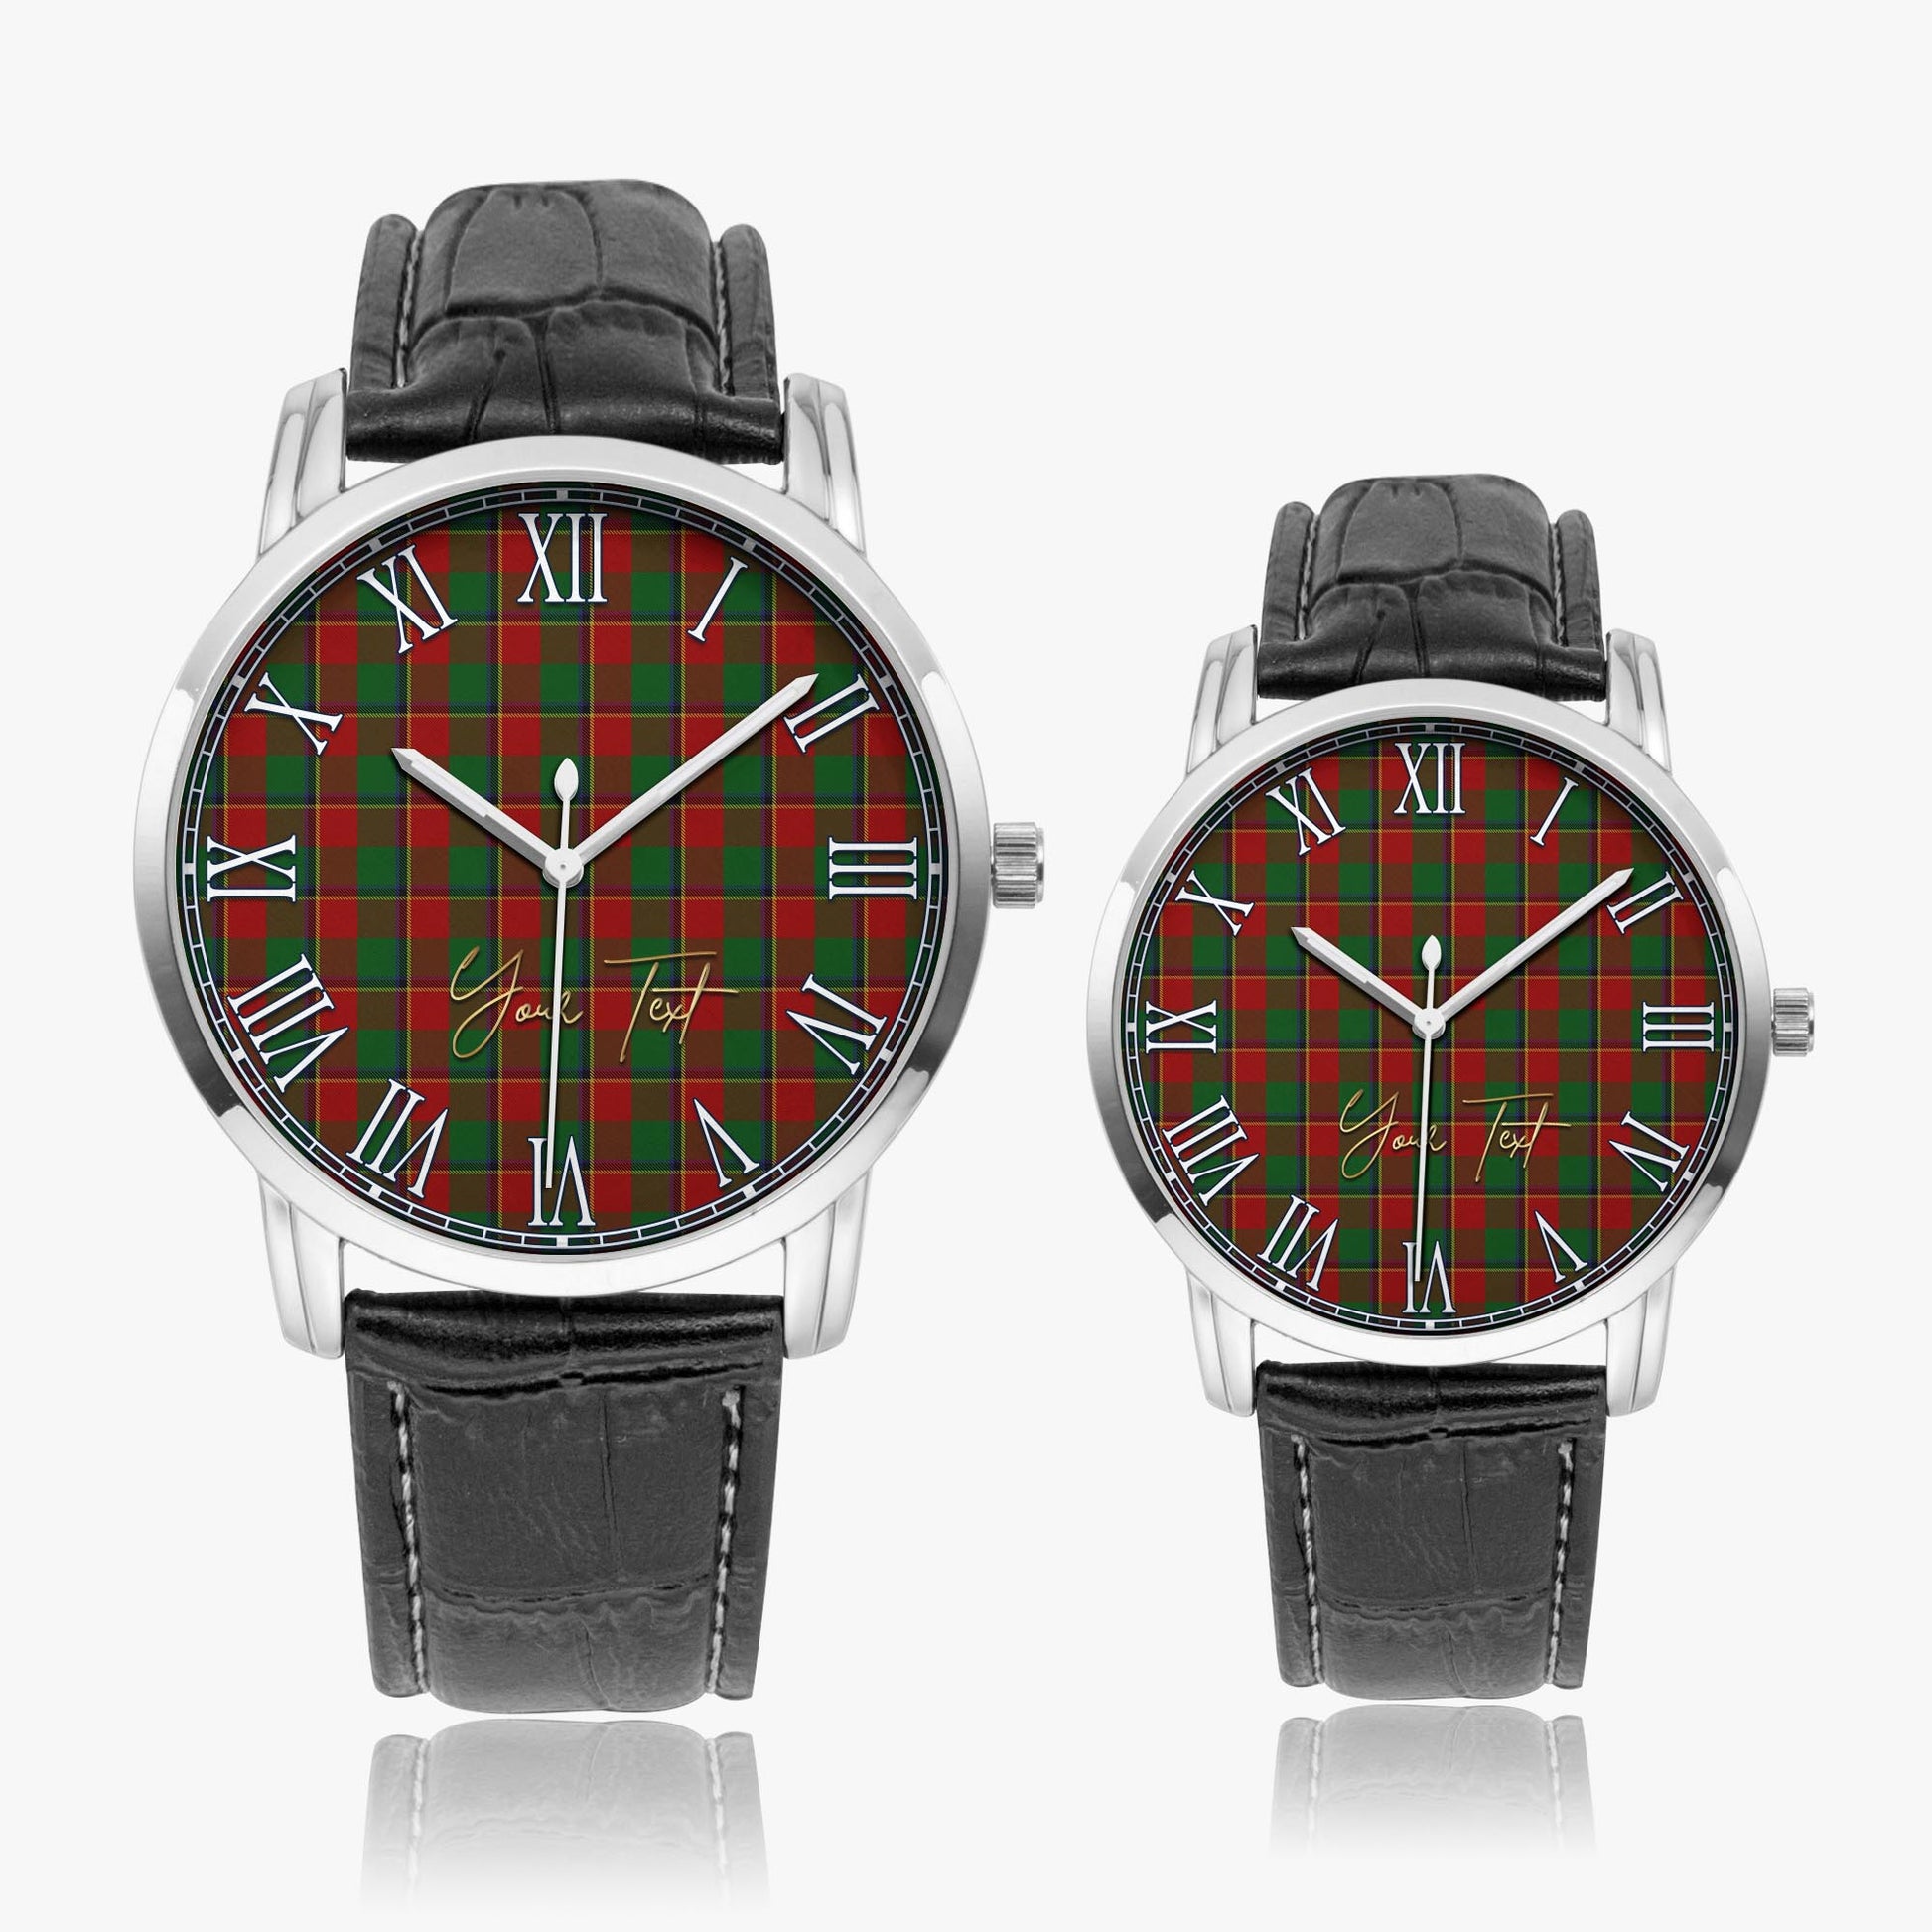 Turnbull Dress Tartan Personalized Your Text Leather Trap Quartz Watch Wide Type Silver Case With Black Leather Strap - Tartanvibesclothing Shop